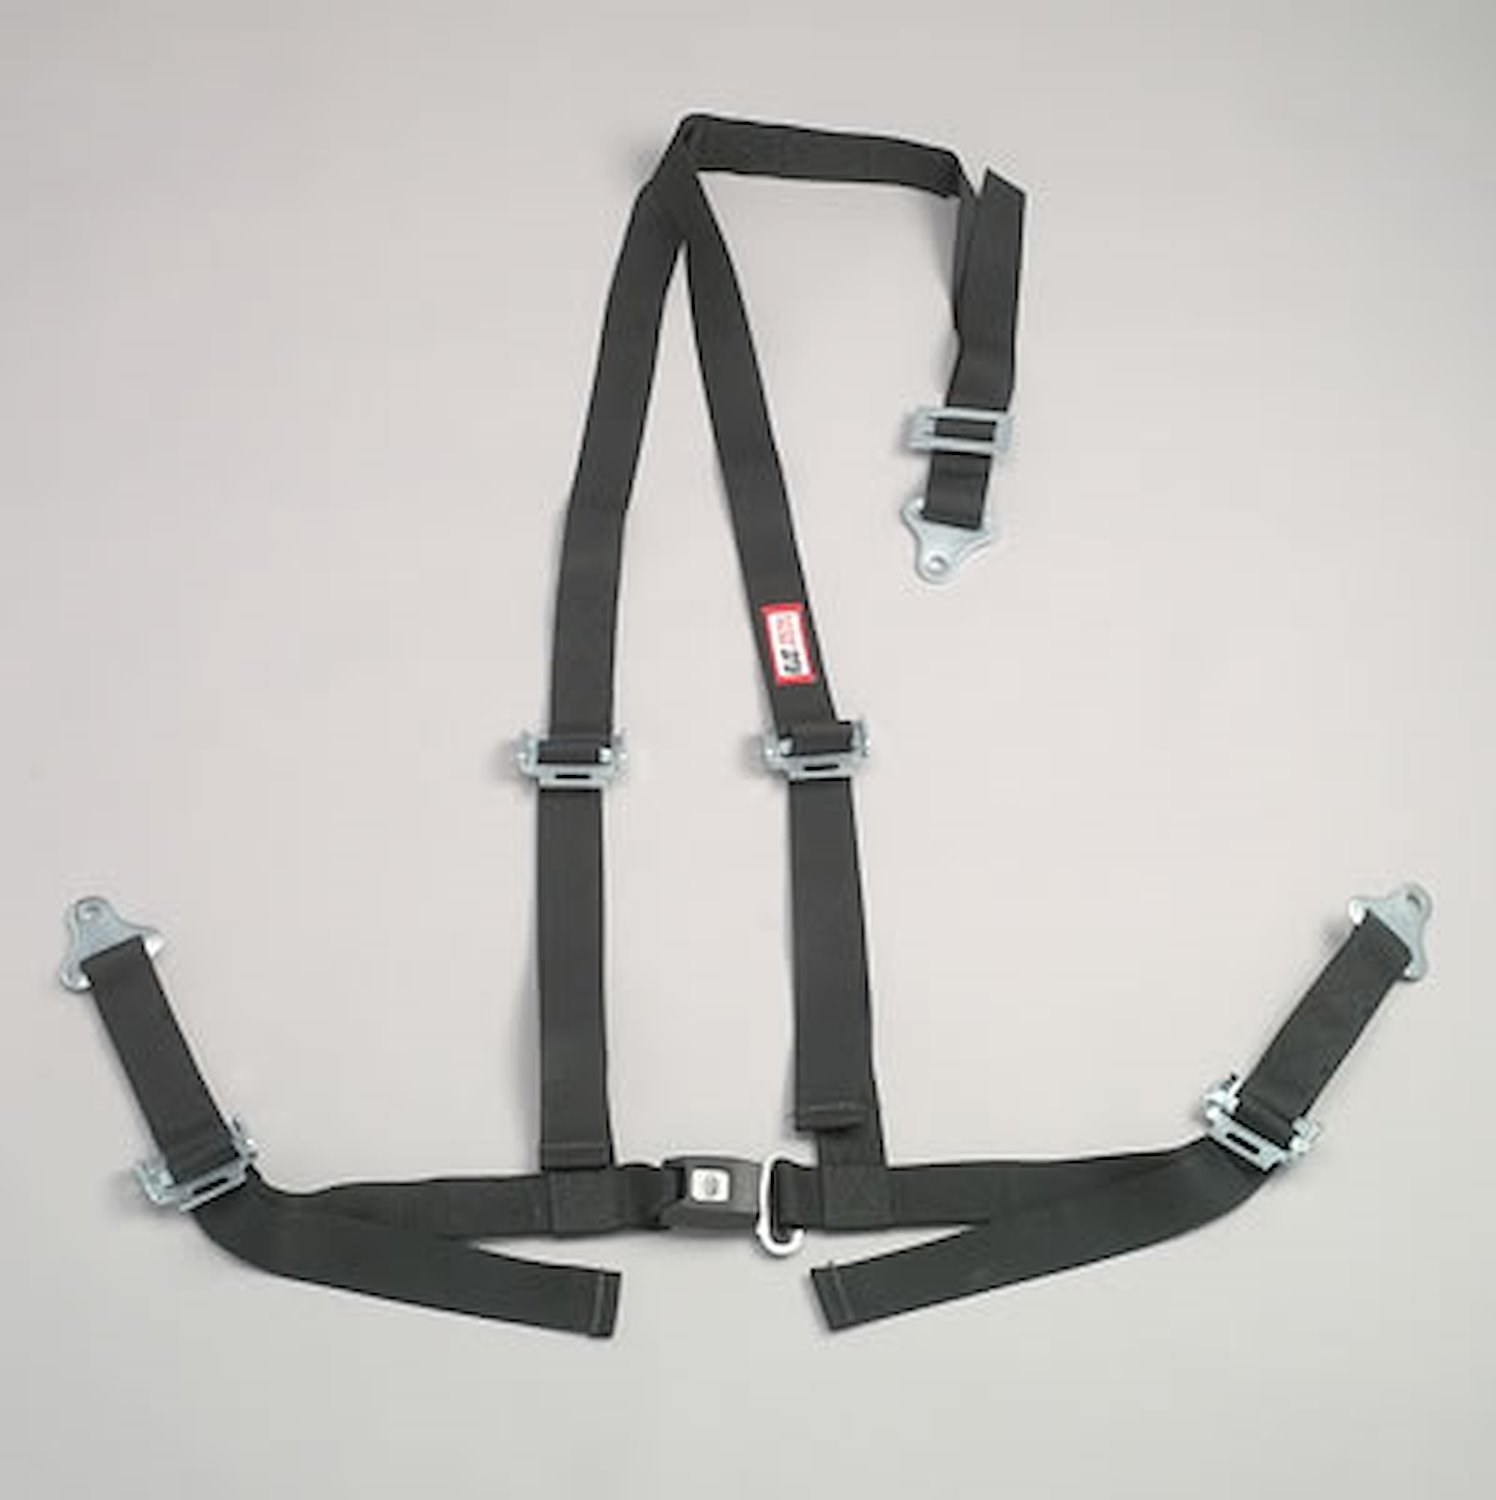 NON-SFI B&T HARNESS 2 PULL UP Lap Belt SNAP 2 S. H. Individual ROLL BAR Mount WRAP/BOLT w/STERNUM STRAP YELLOW